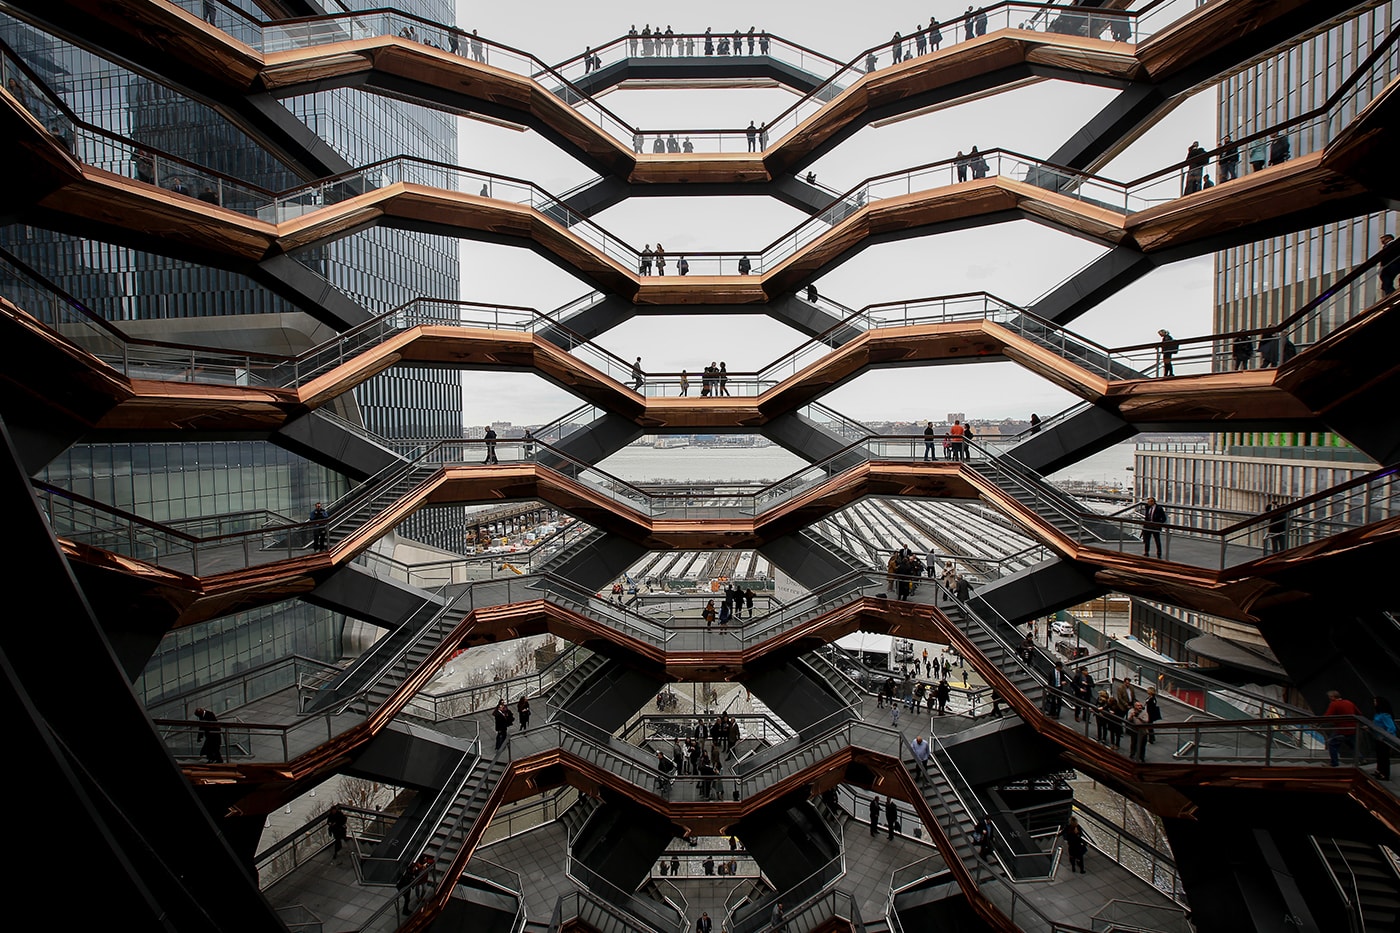 New York's Hudson Yards 'Vessel' Closes Indefinitely suicide prevention structure manhattan instagram Thomas Heatherwick jump tourist attractions tower architecture 